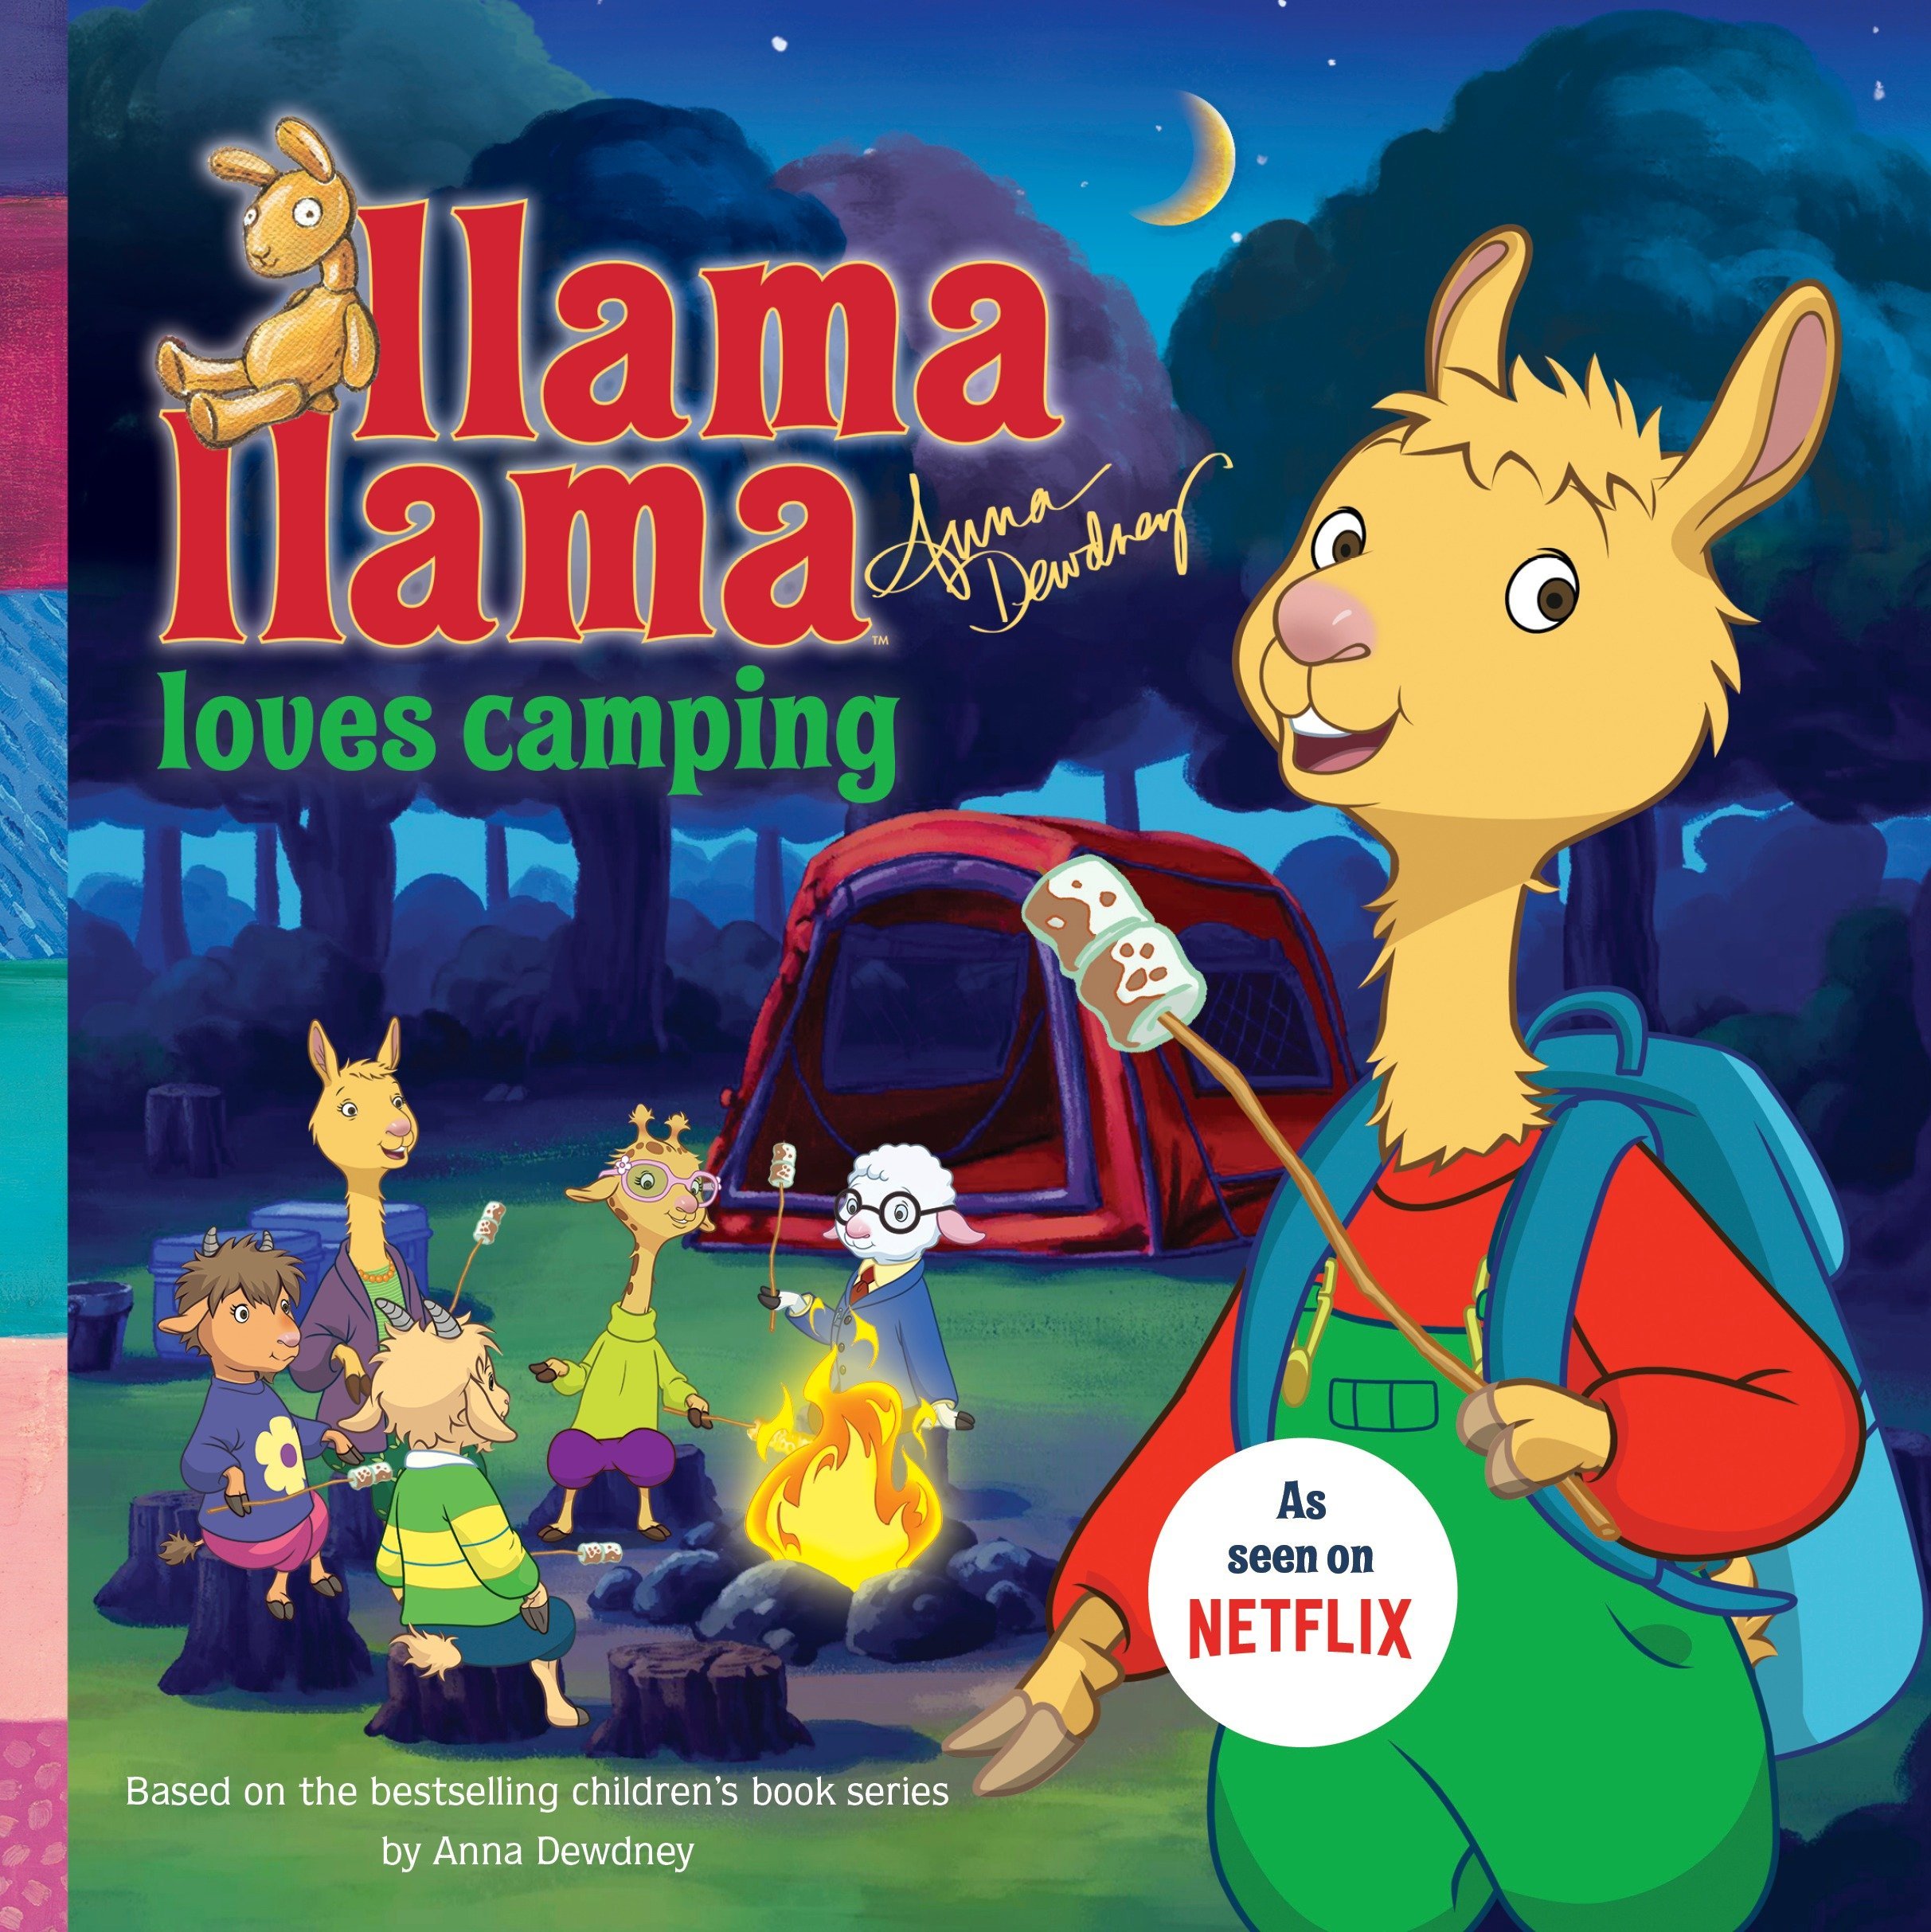 speech and language teaching concepts for Llama Llama Loves Camping in speech therapy​ ​